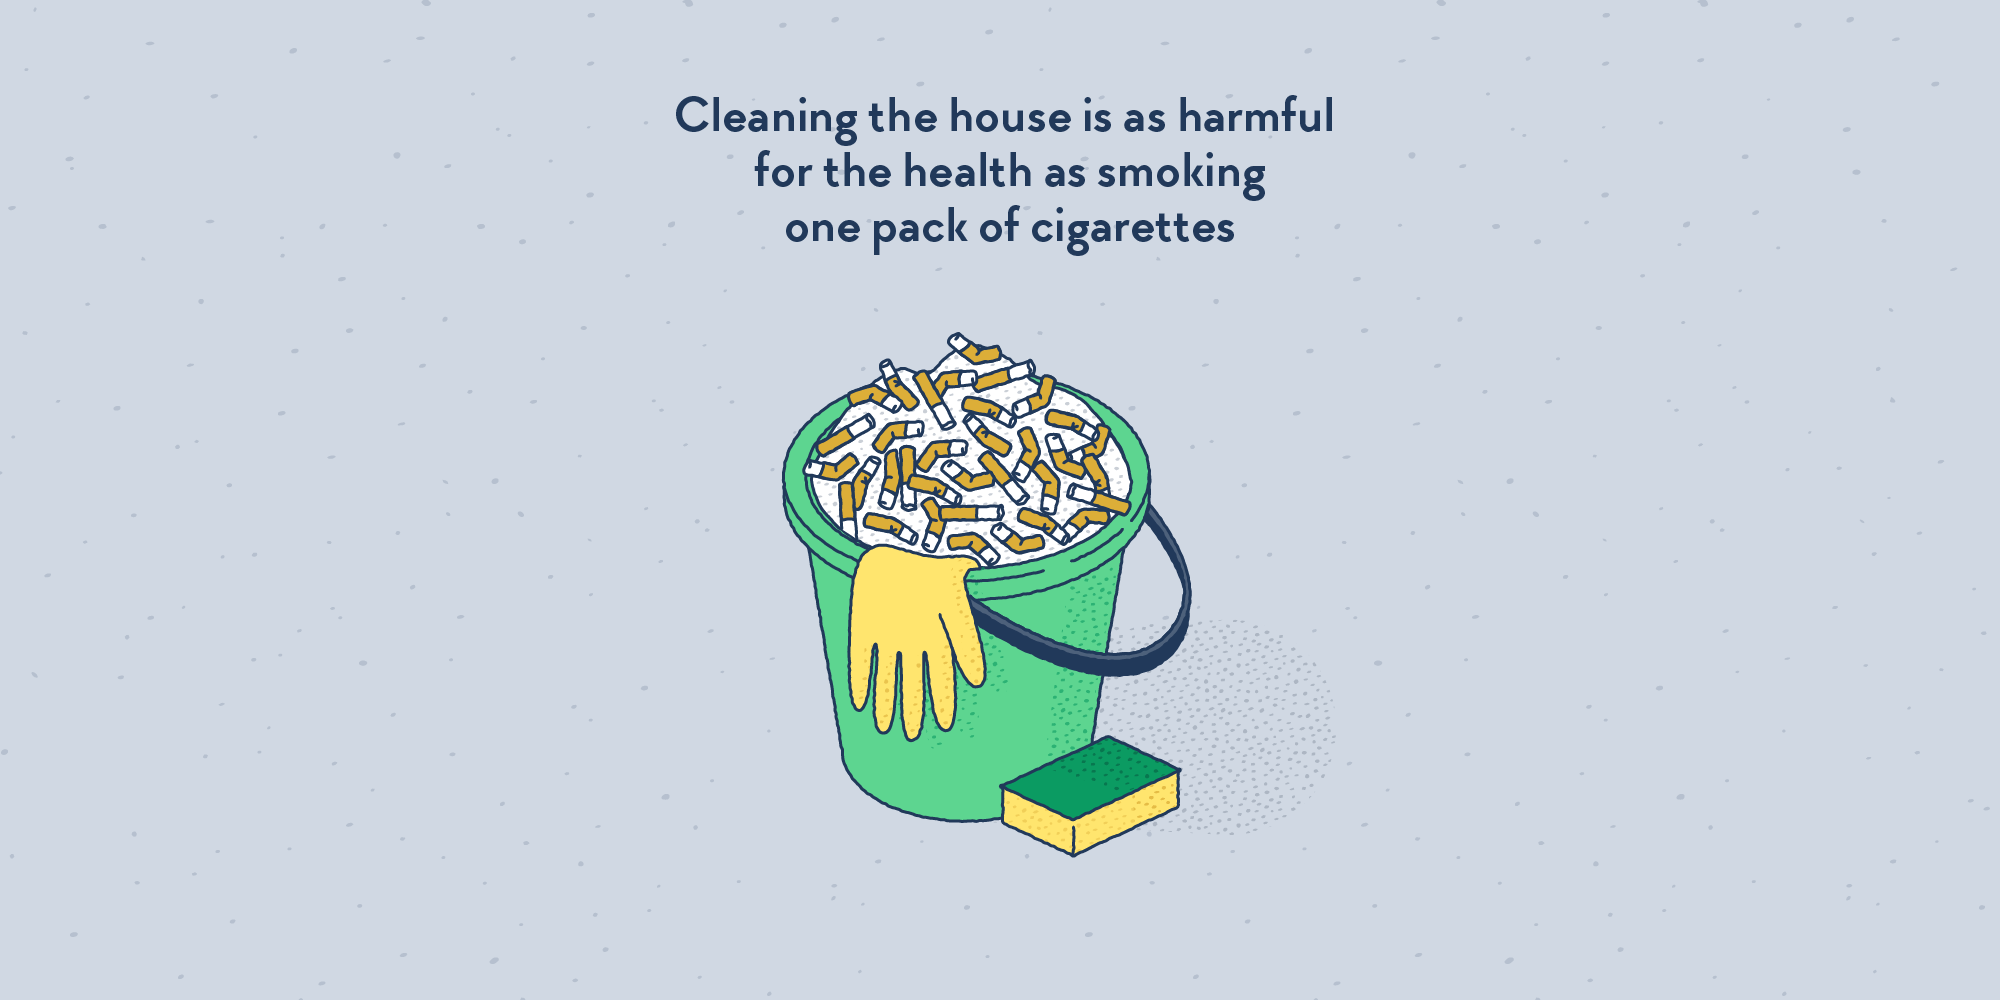 A cleaning bucket full of cigarettes.